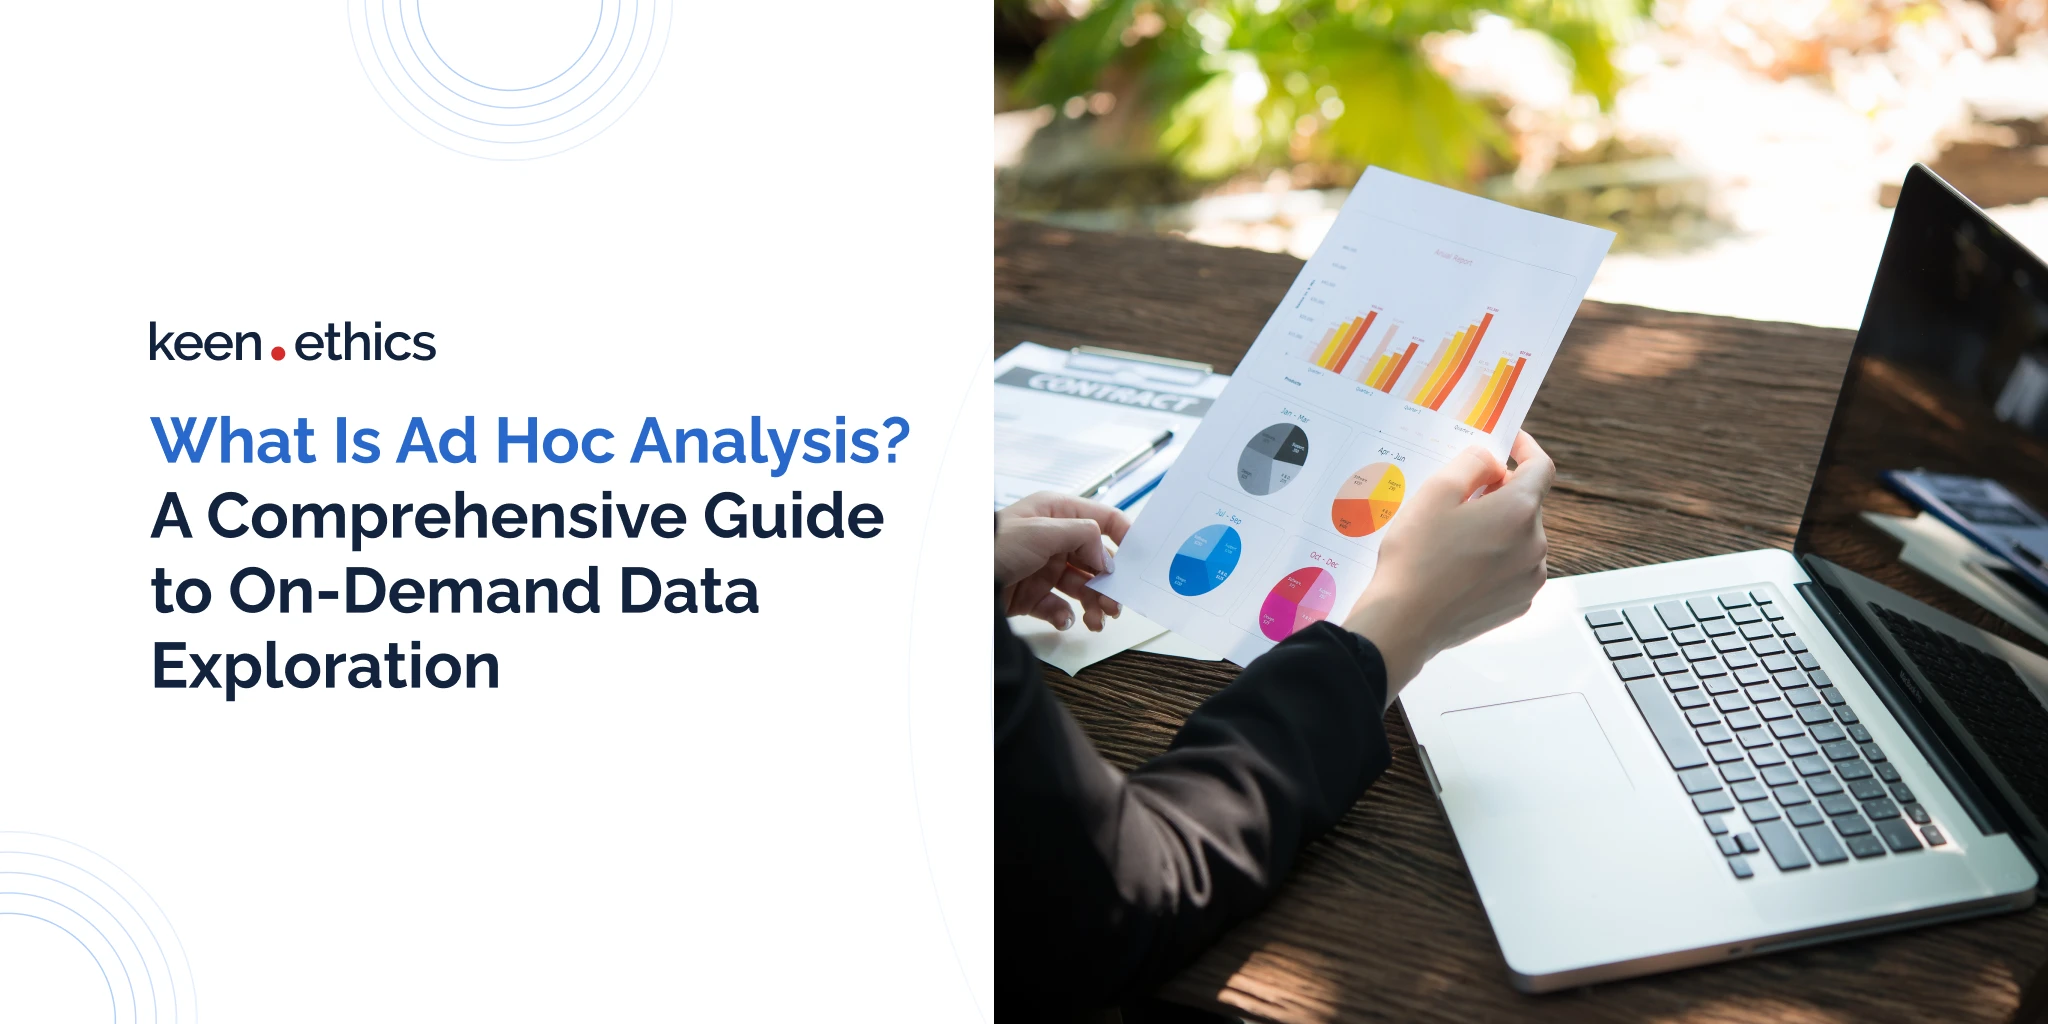 What is ad hoc analysis